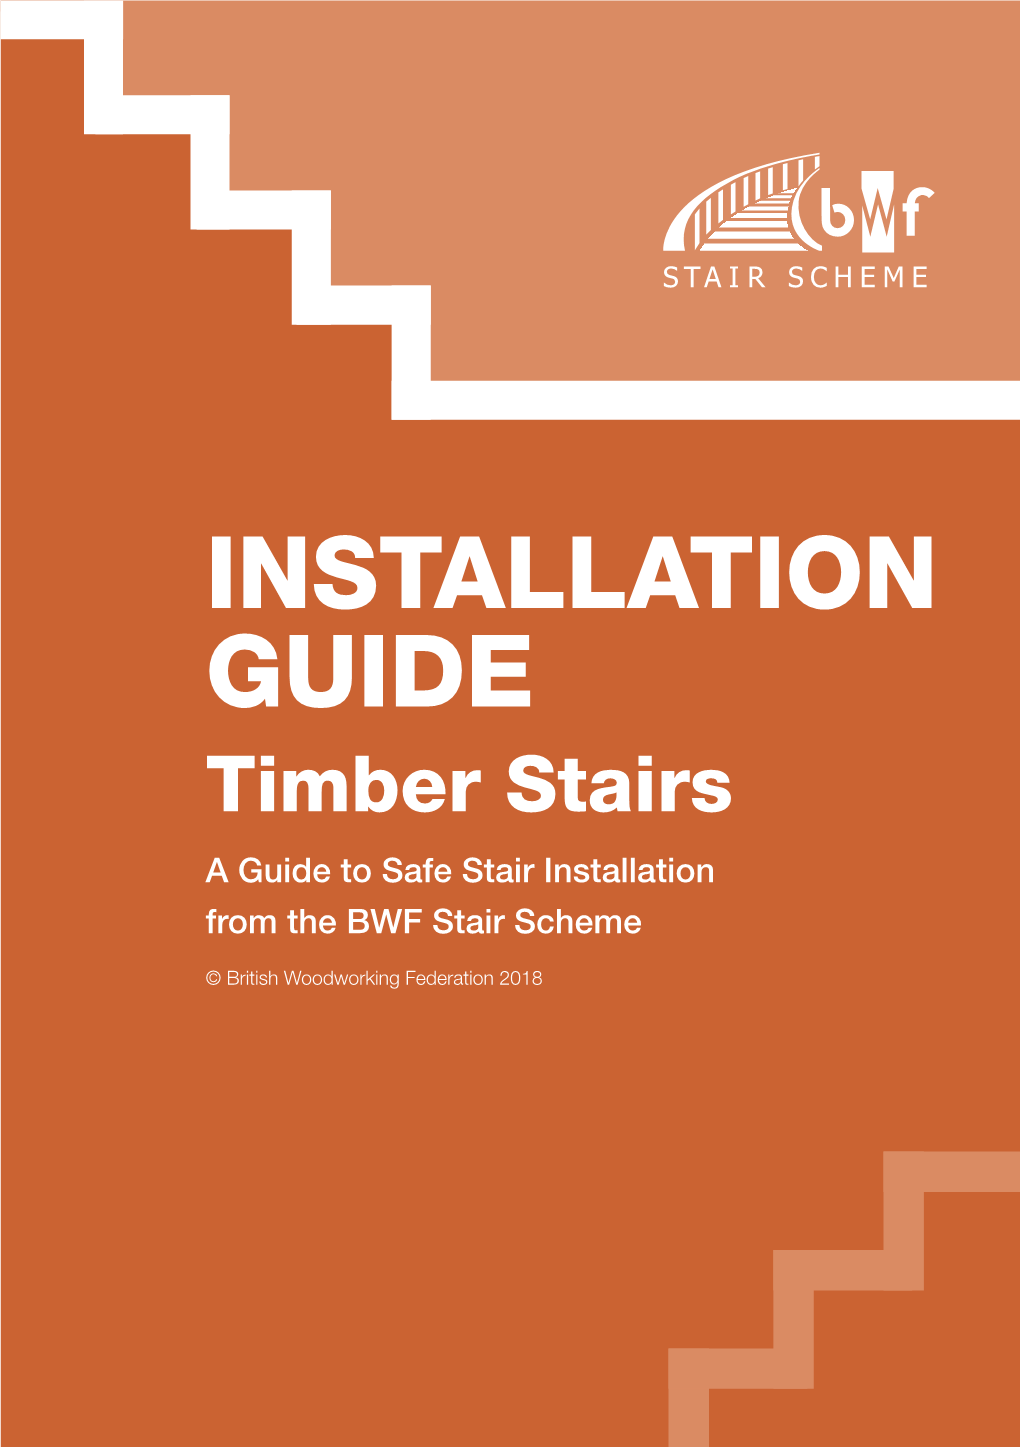 INSTALLATION GUIDE Timber Stairs a Guide to Safe Stair Installation from the BWF Stair Scheme